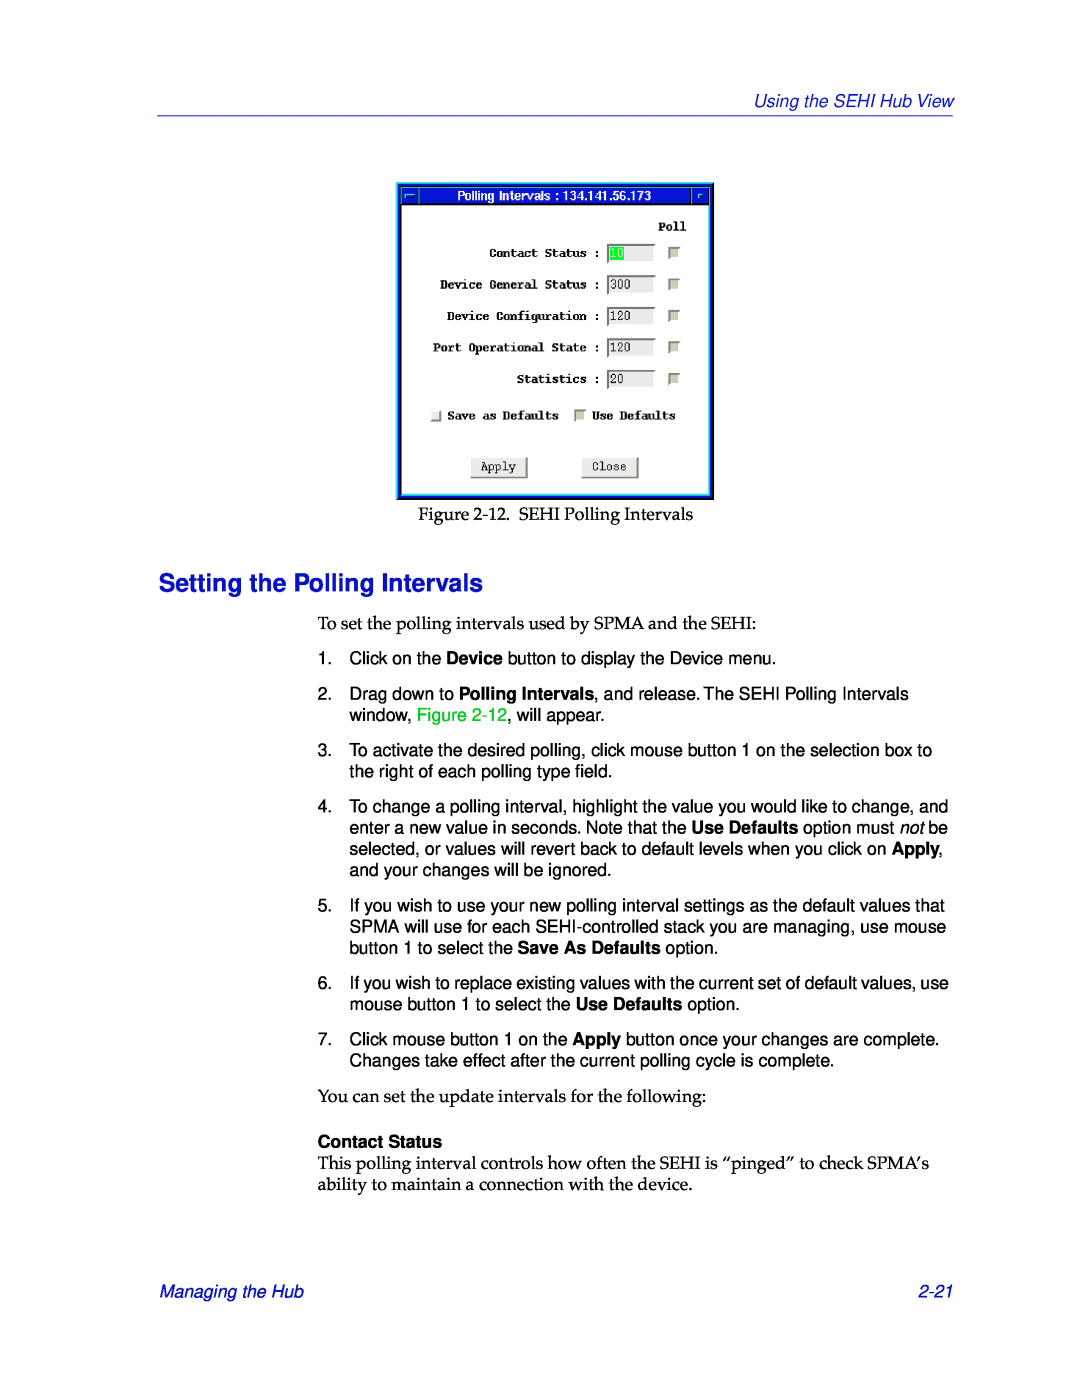 Cabletron Systems SEHI-22/24, SEHI-32/34 manual Setting the Polling Intervals, Contact Status, 2-21, Using the SEHI Hub View 